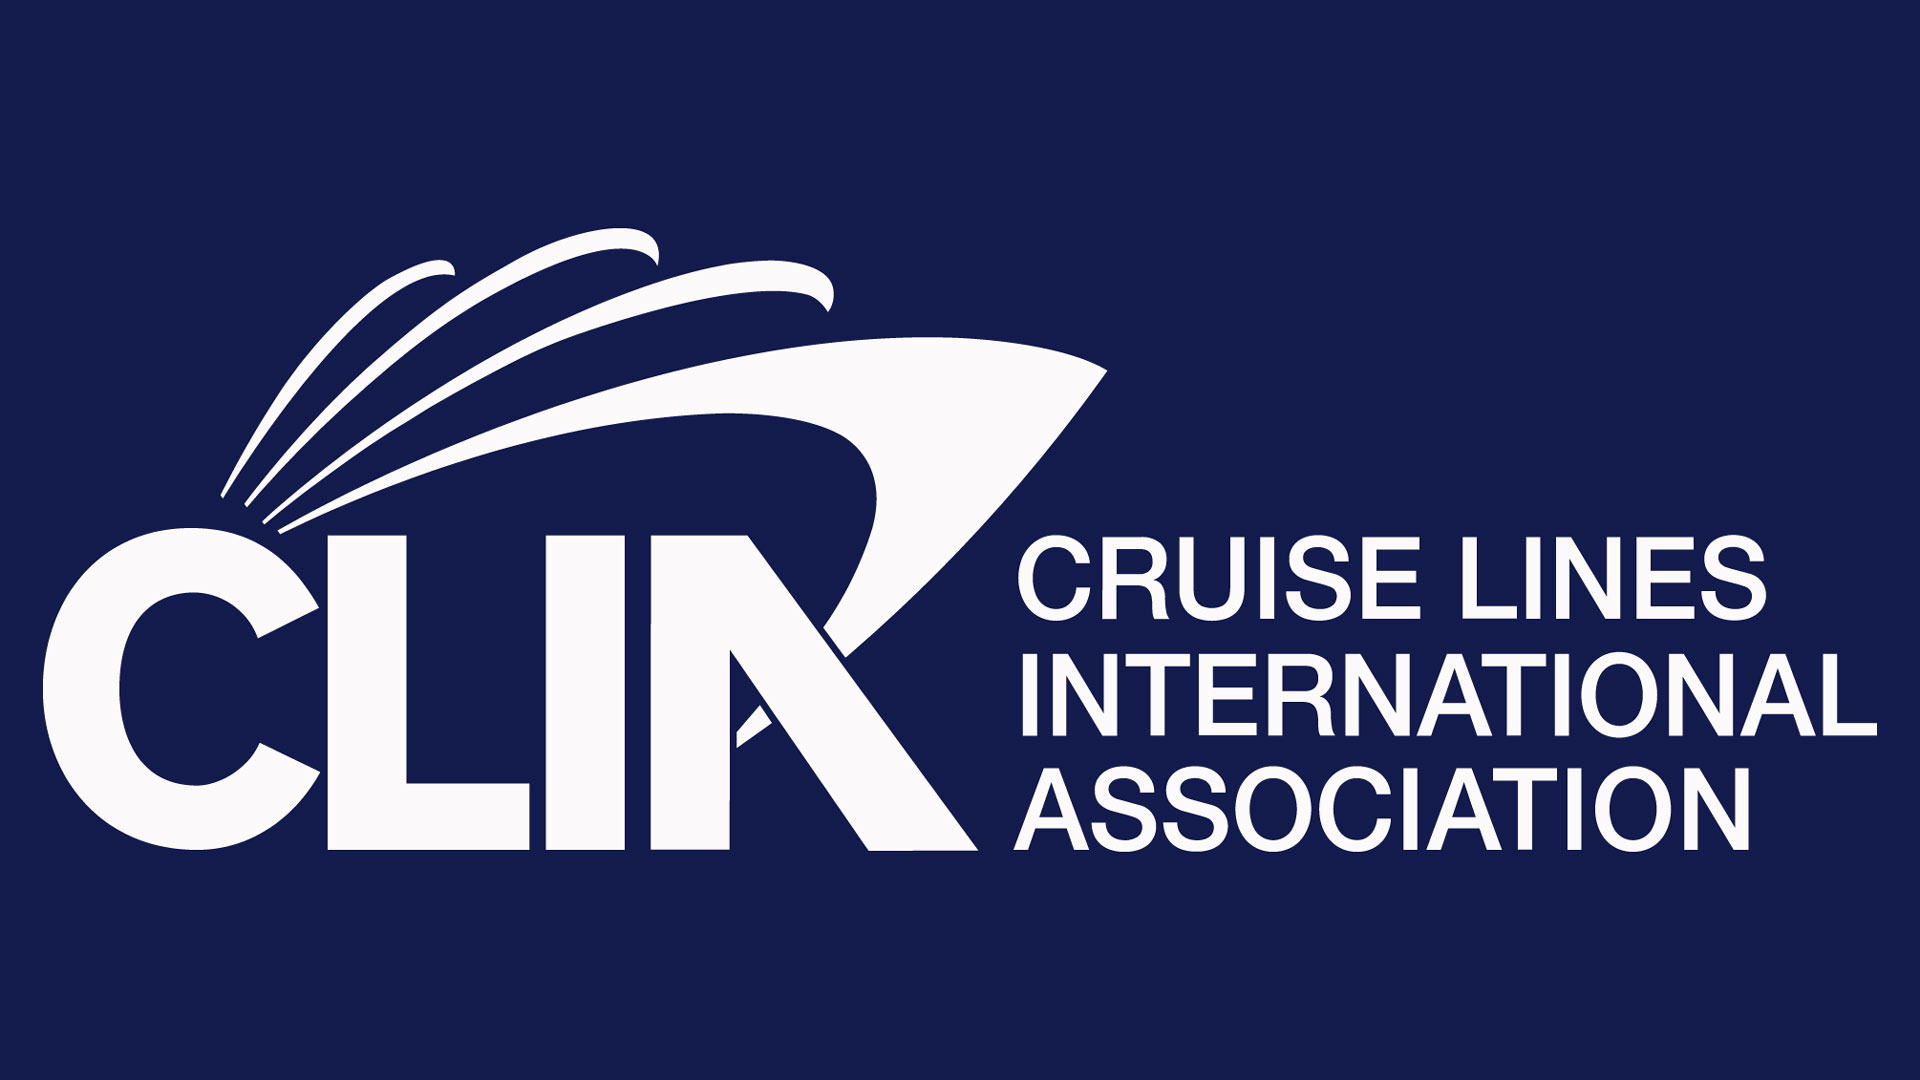 CLIA Announces Voluntary Suspension of Cruise Operations from U.S